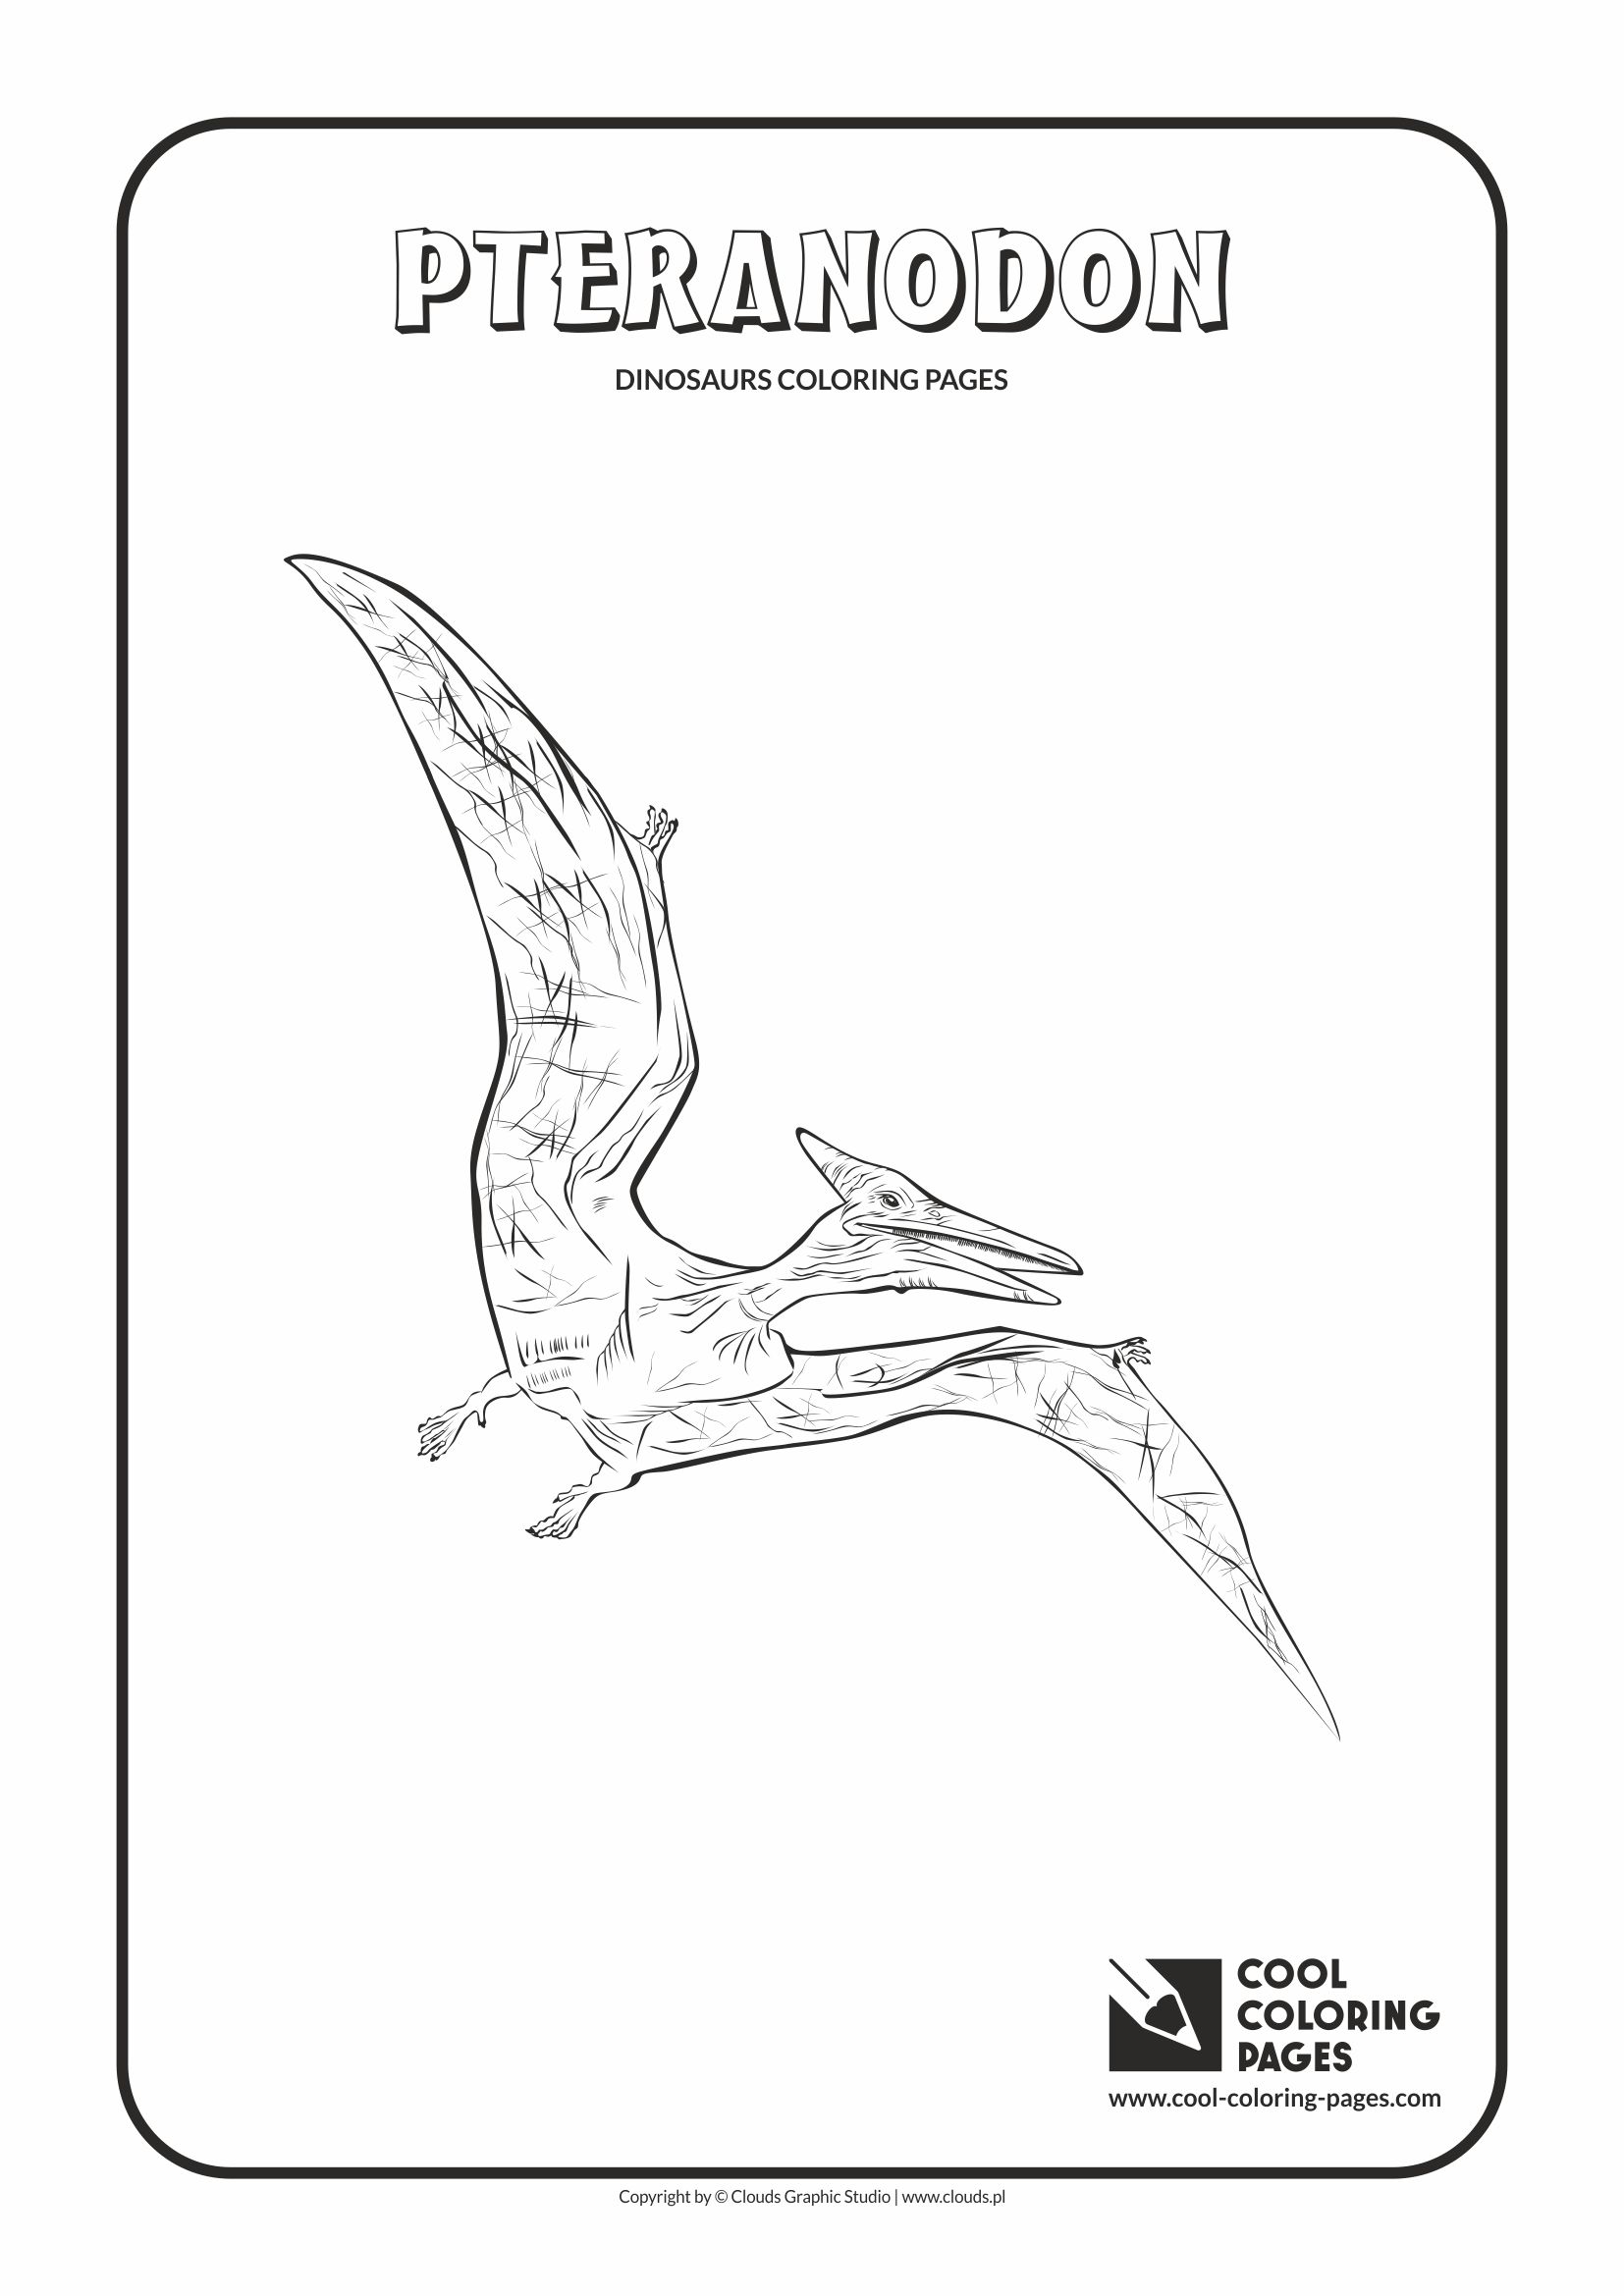 Cool Coloring Pages Dinosaurs coloring pages - Cool Coloring Pages